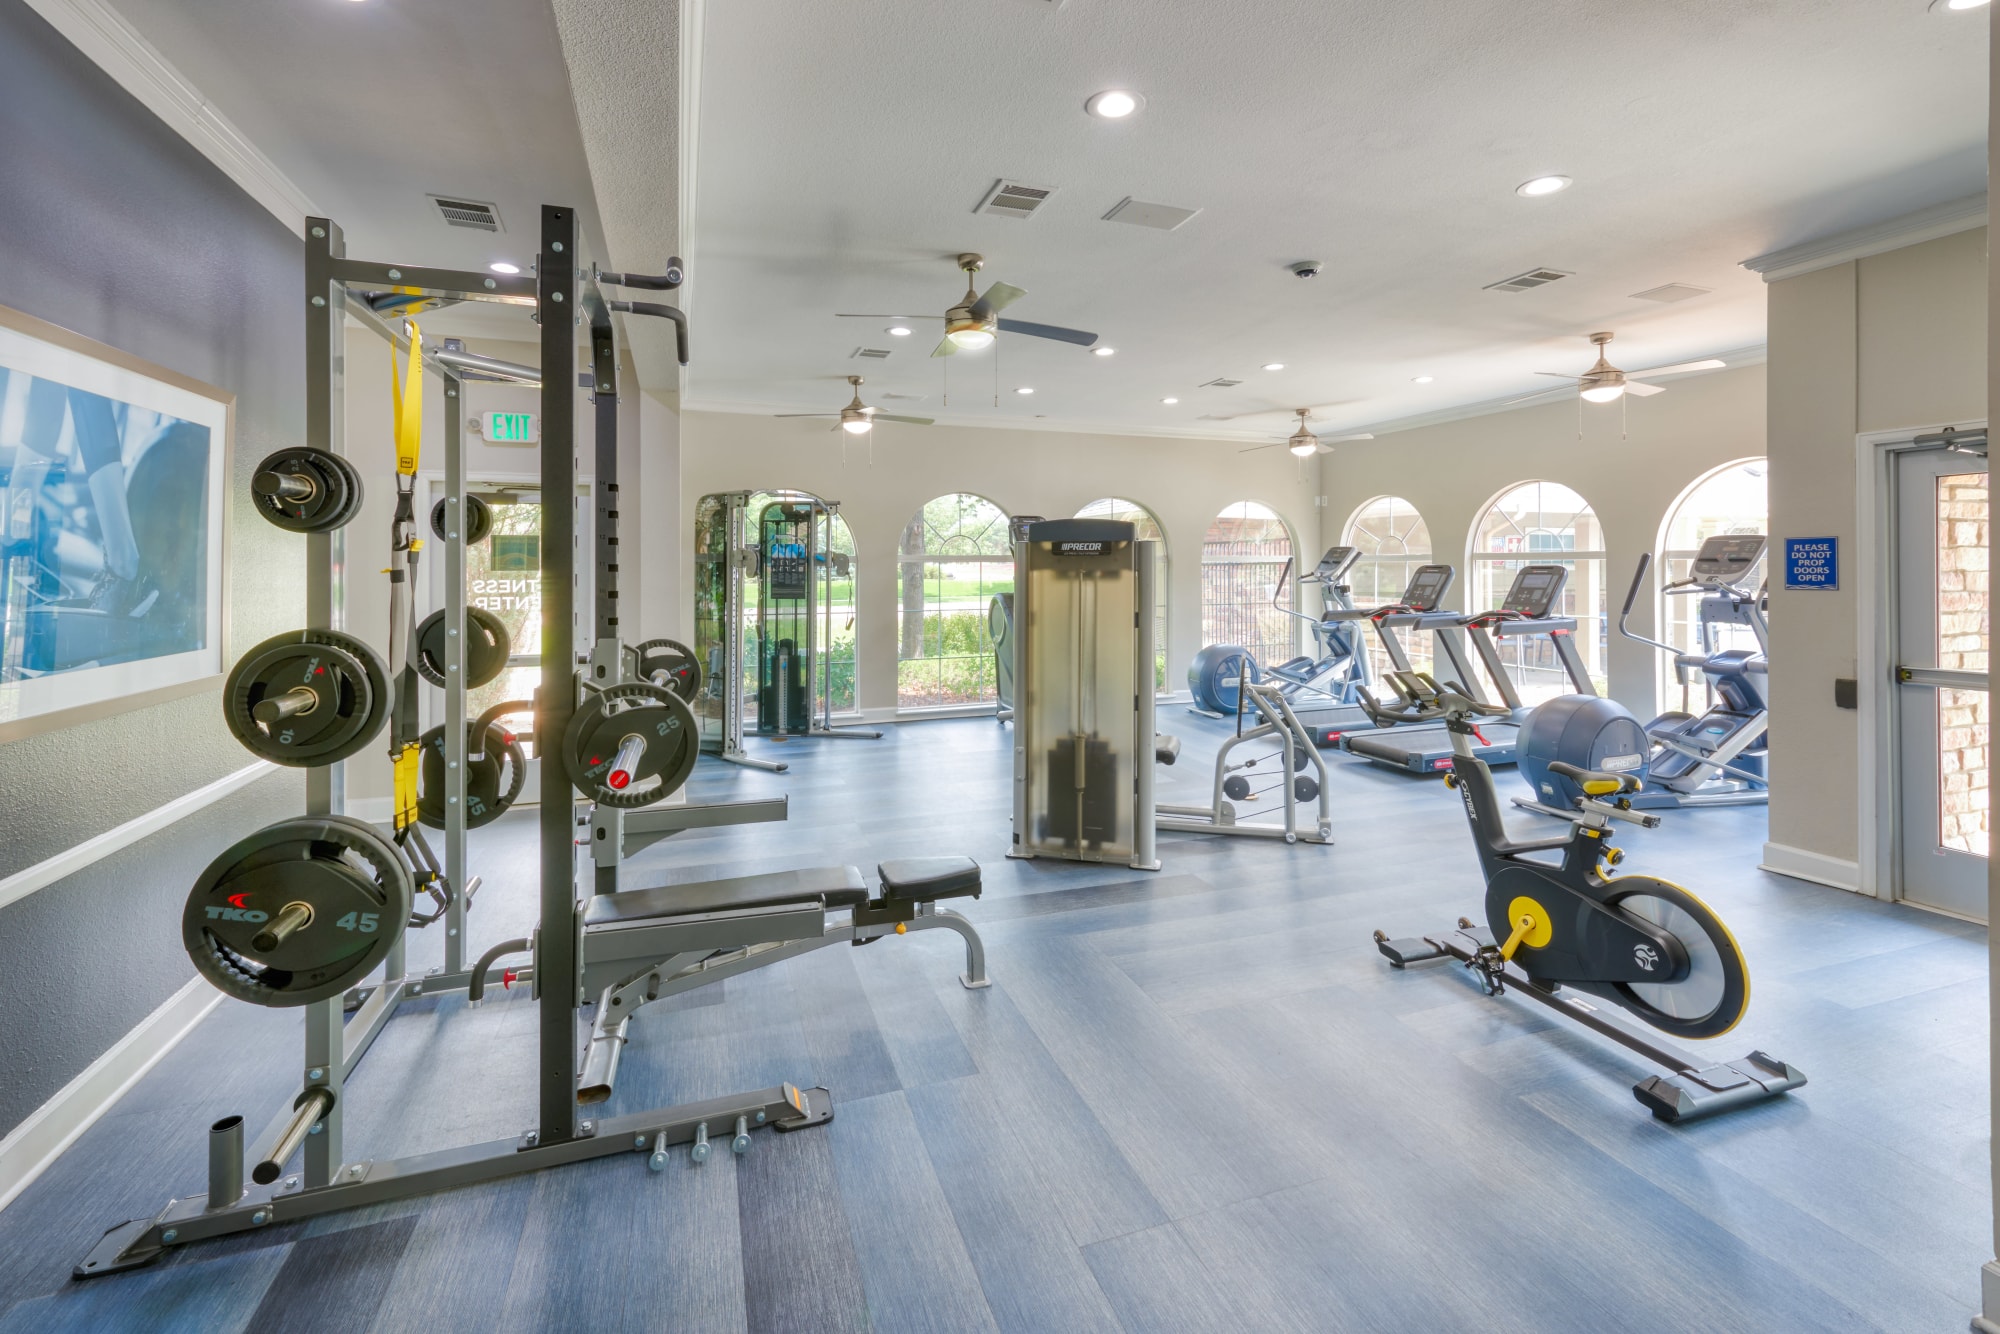 Fitness center entryway and weights at Gateway Park Apartments in Denver, Colorado